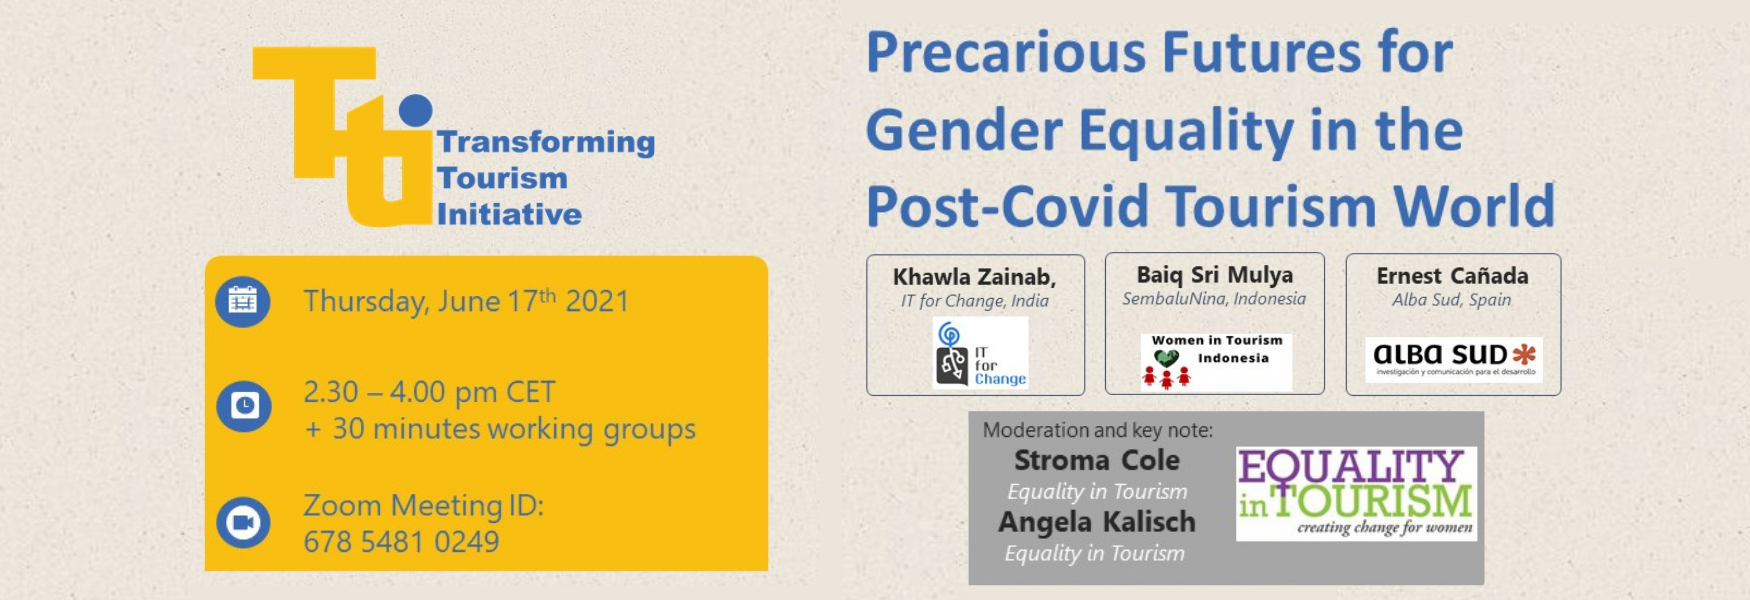 Precarious Futures for Gender Equality in the Post-Covid Tourism World